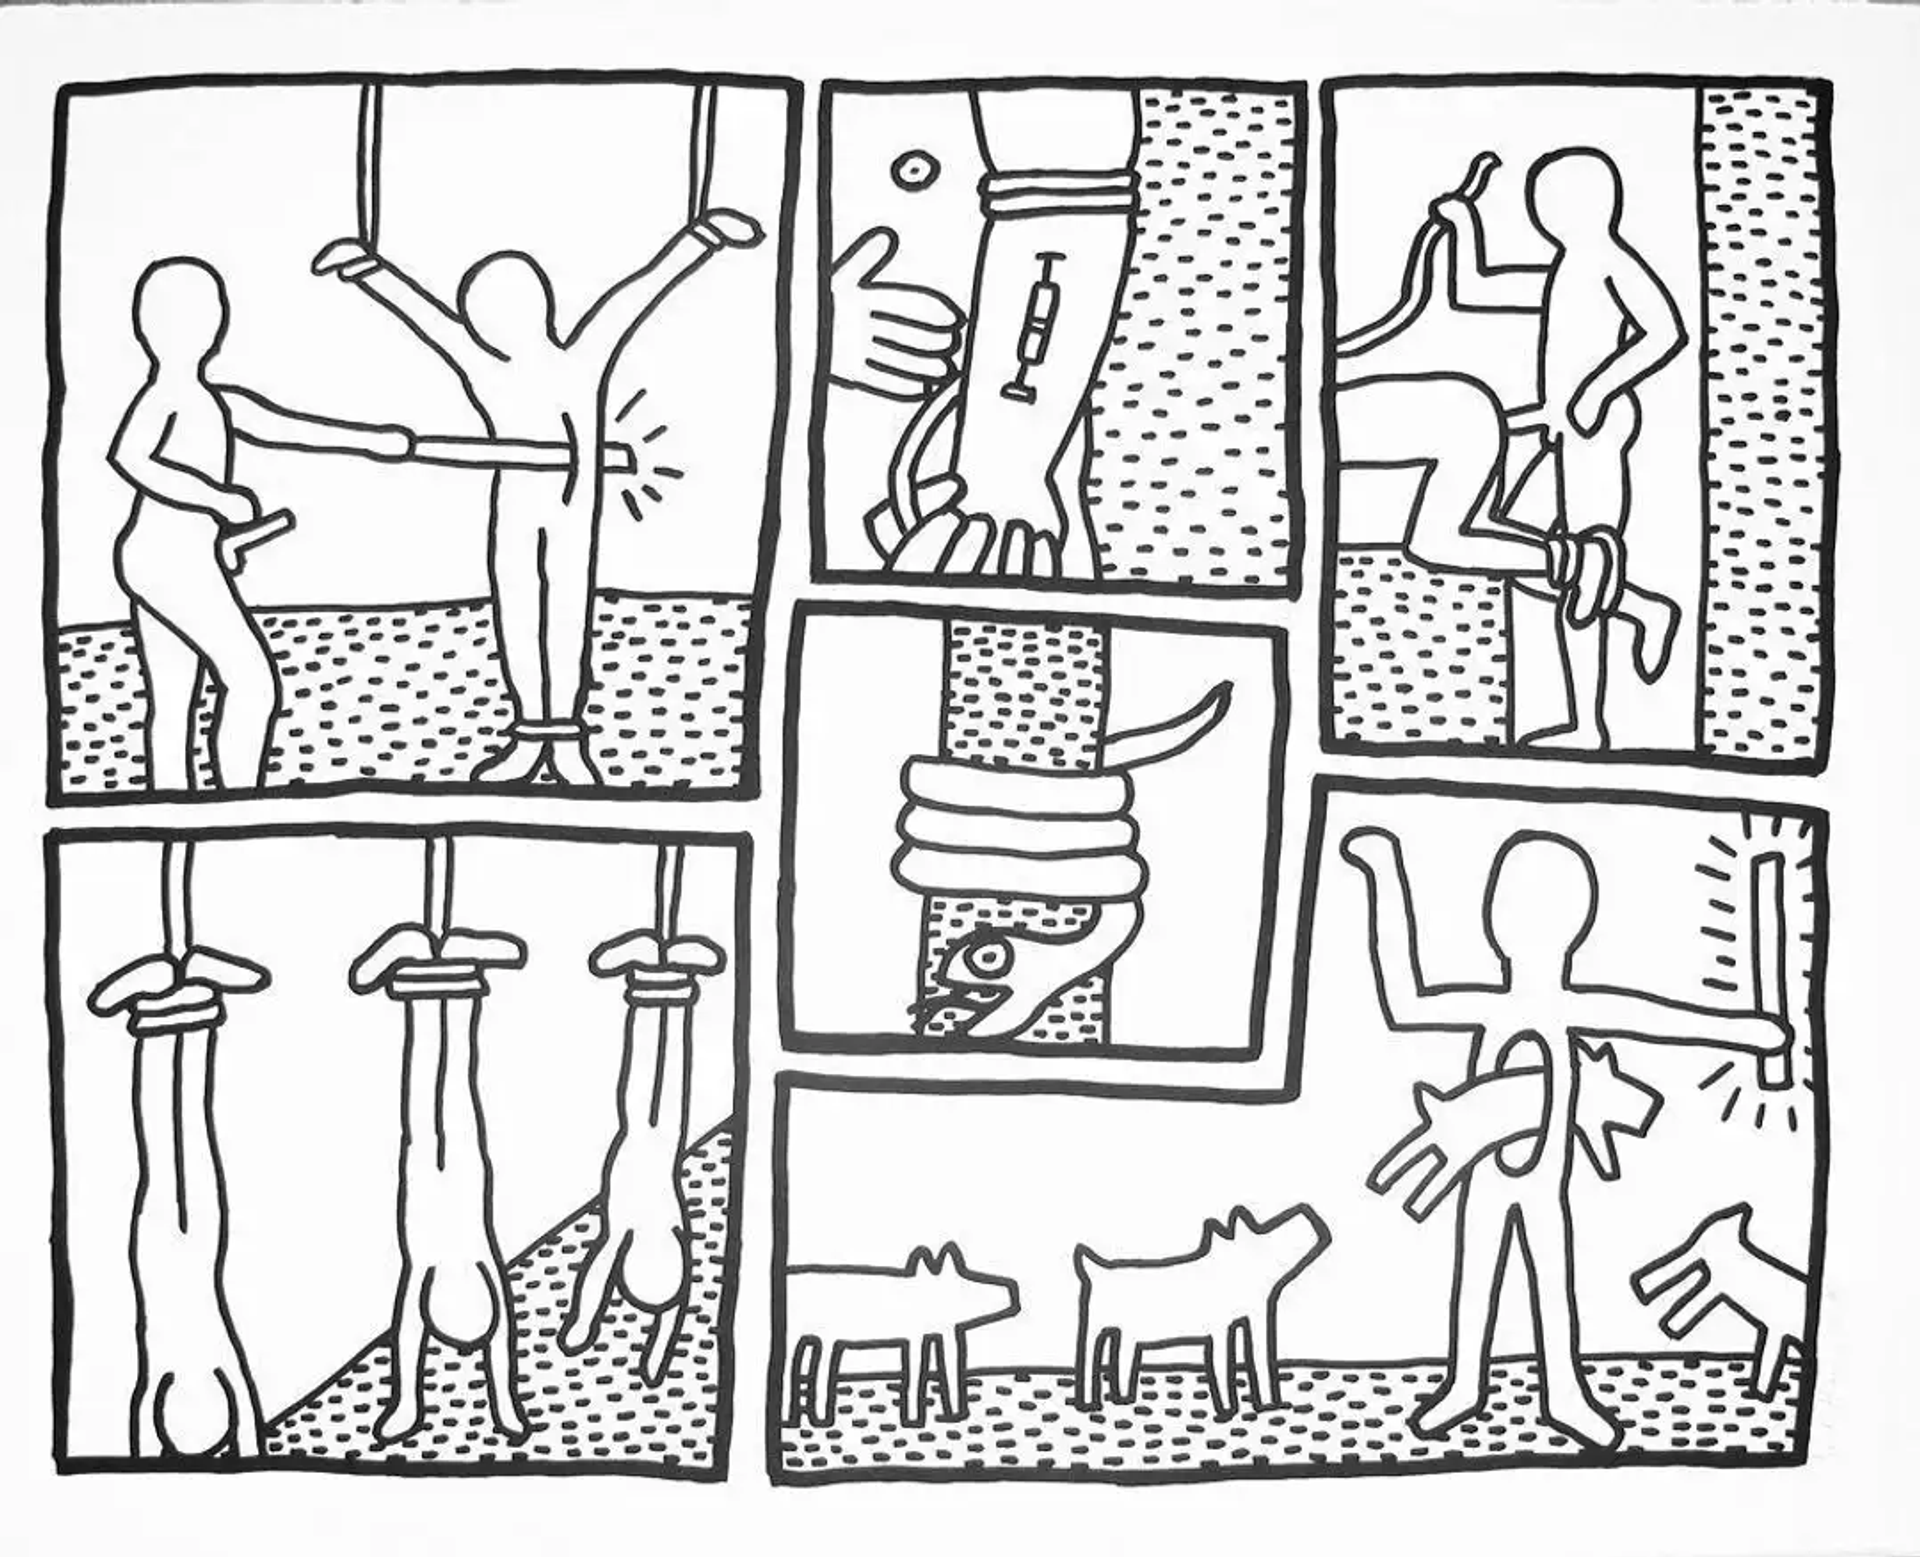 This print features a collection of frames rendered in Haring’s trademark figurative style, showing snapshots of violence, drug use, sex, sin and death. As with other prints in the series, Haring uses dots on the landscape of each frame to denote the otherness of homosexuality and illness, specifically AIDS and each image seems to convey the causes and effects of the disease.